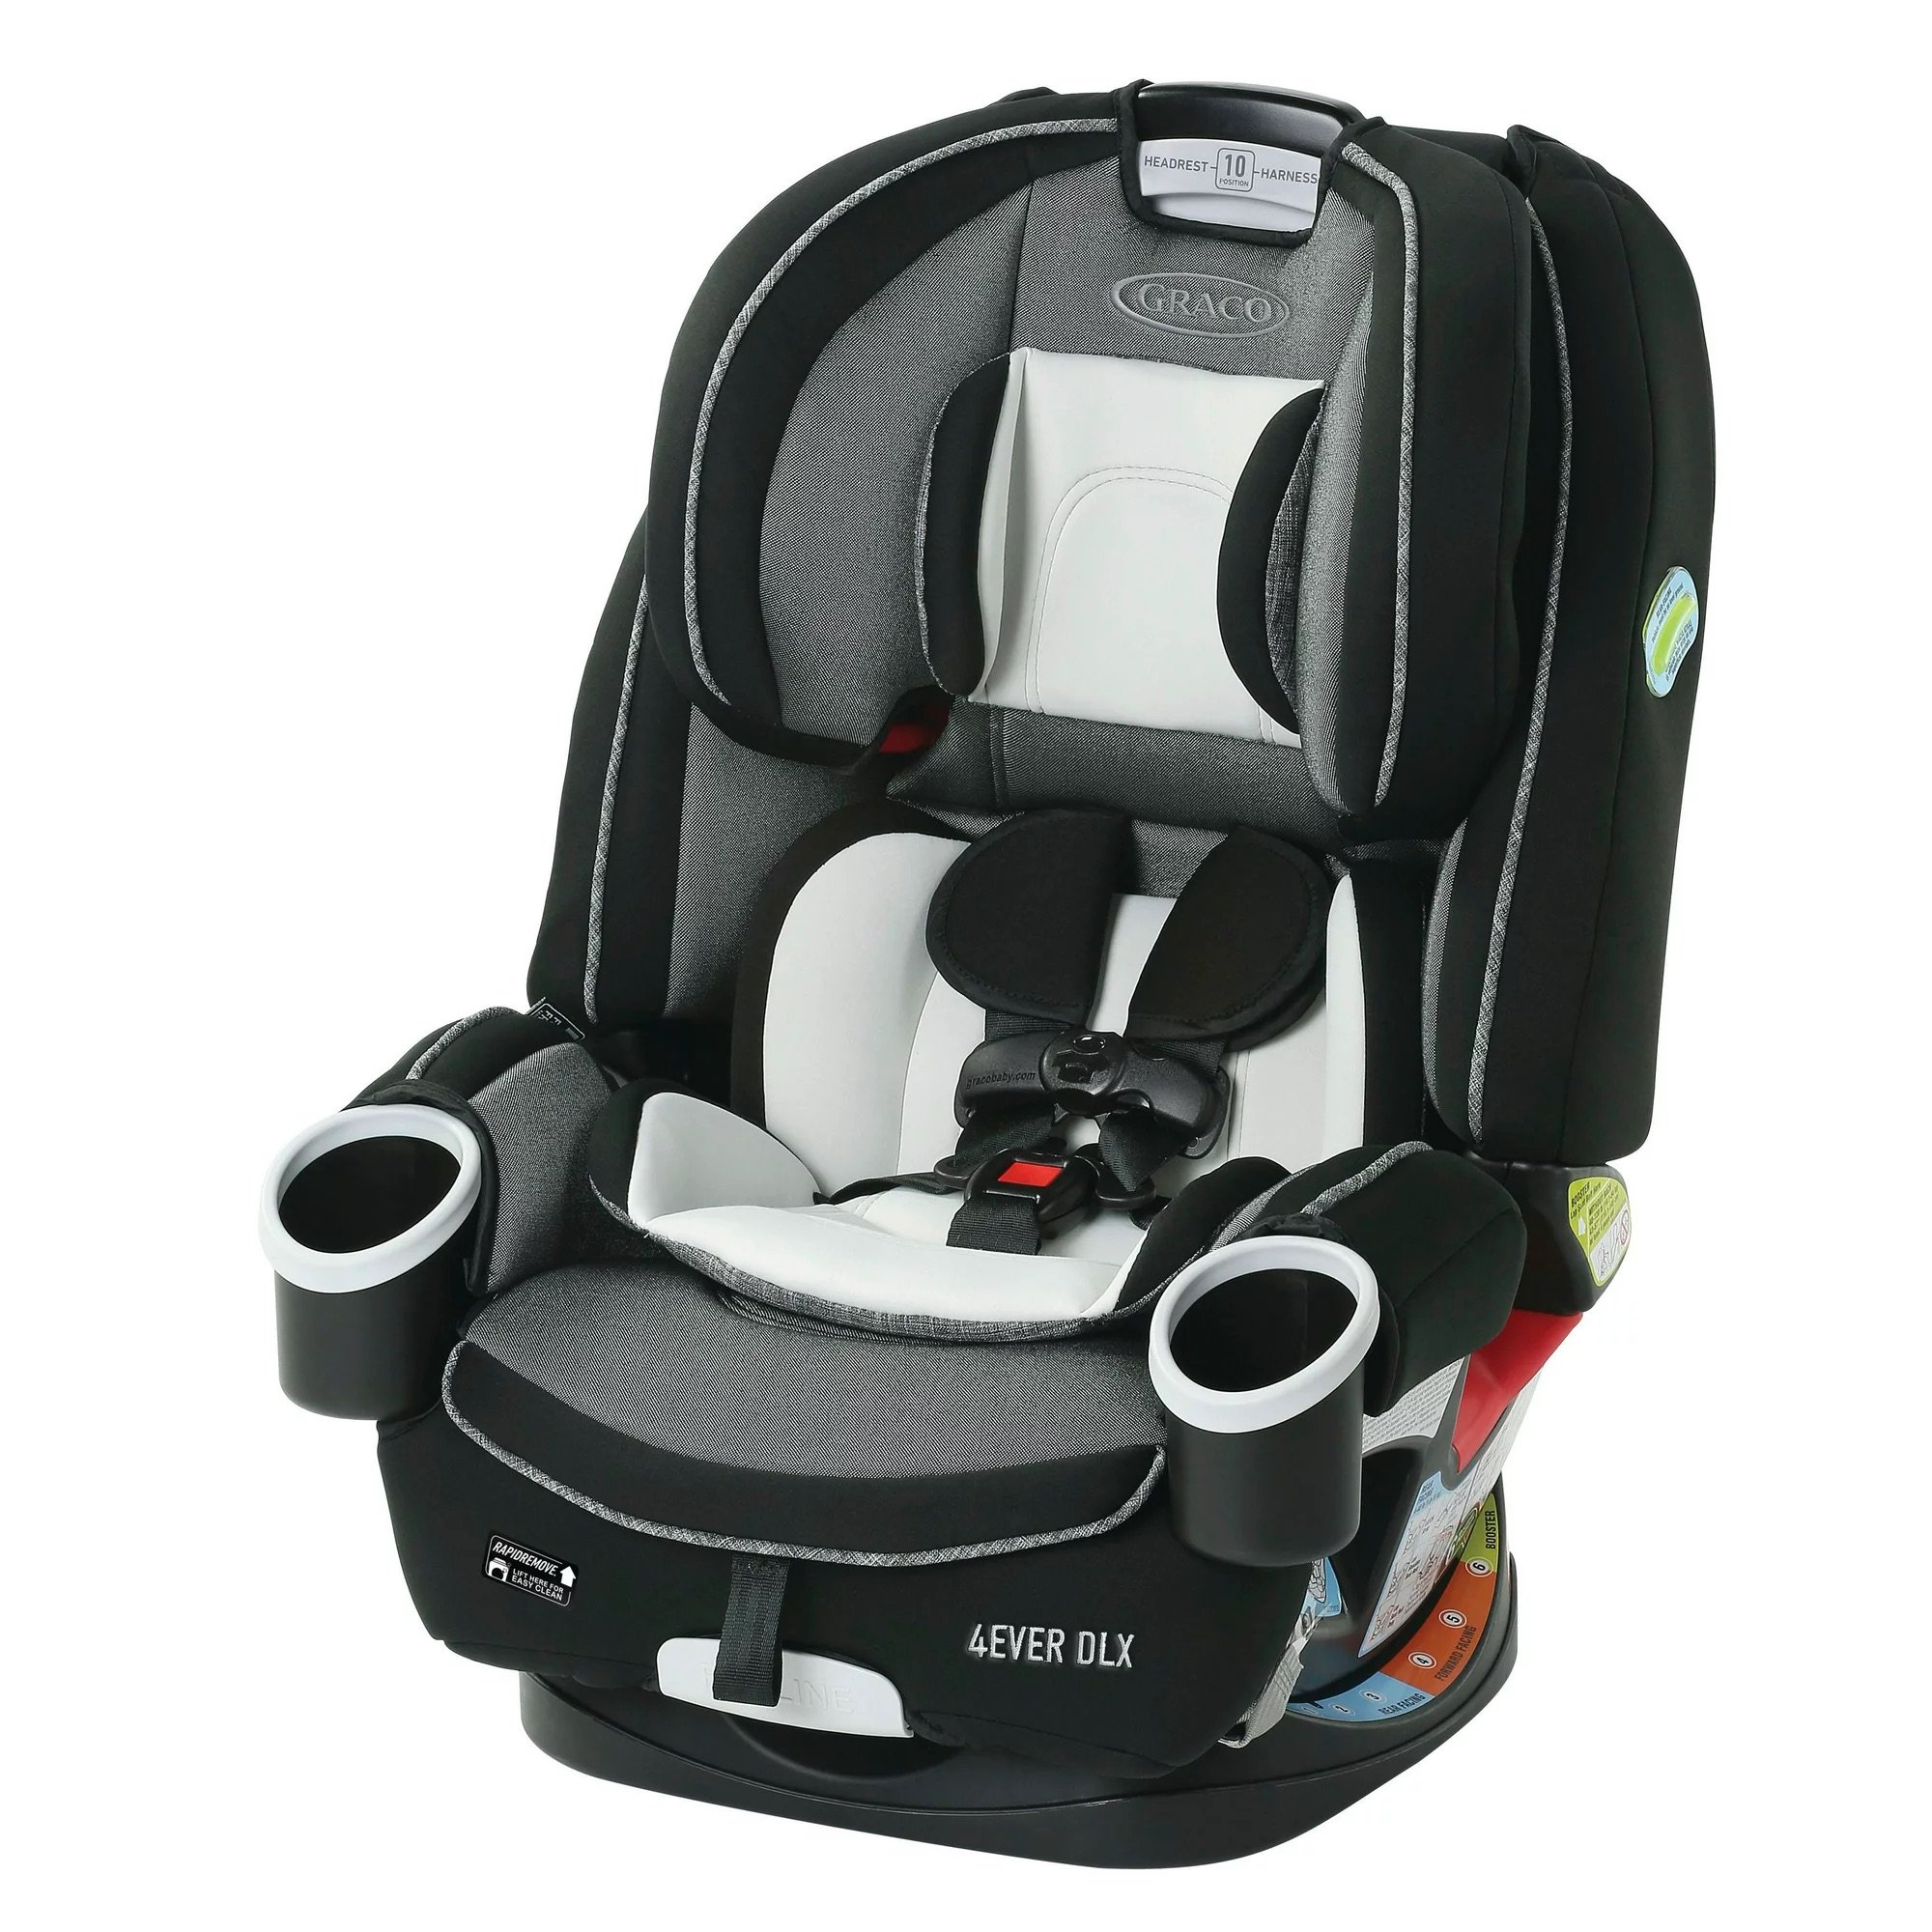 Best Walmart car seats, Graco 4Ever DLX 4-in-1 Convertible Car Seat